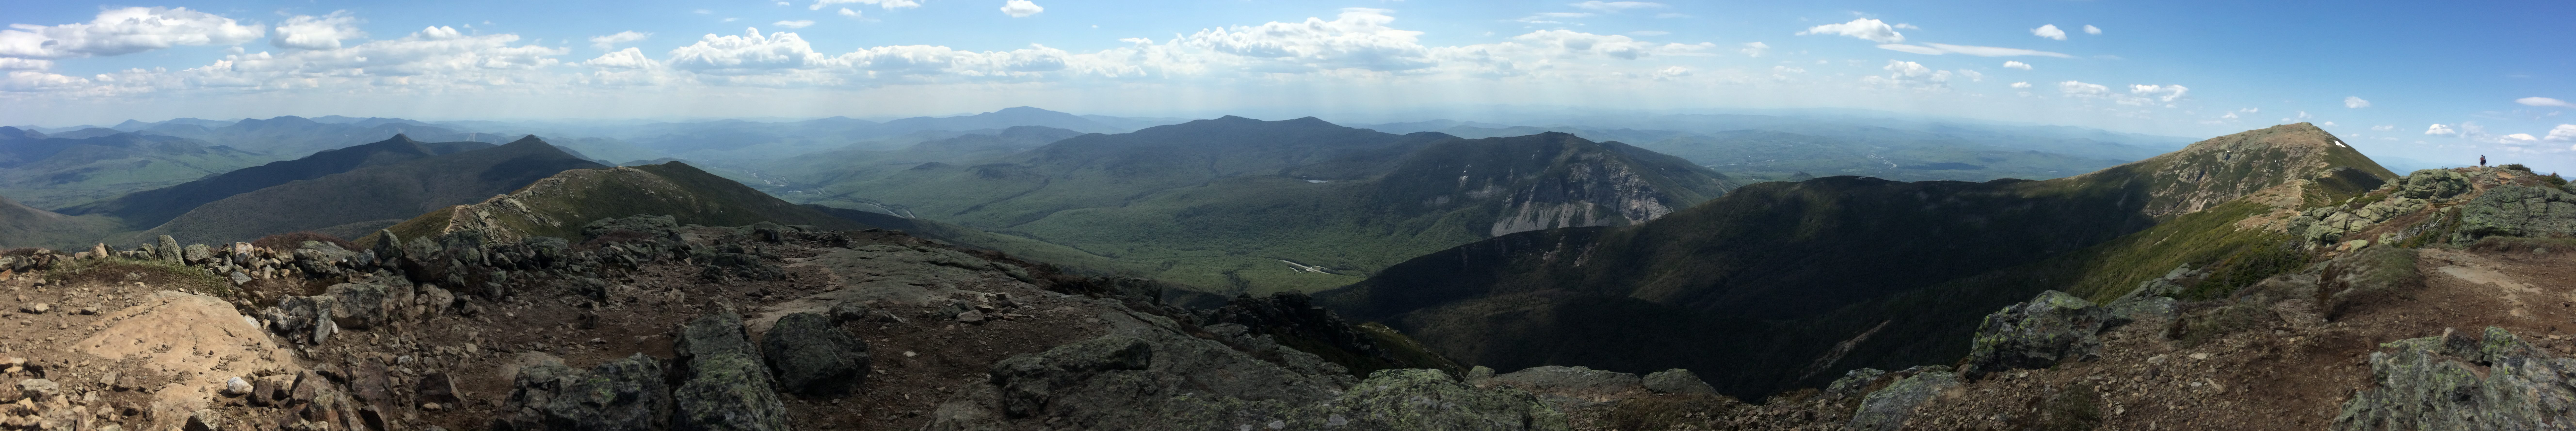 Franconia Ridge – A Complete Guide To An Incredible New England Hike